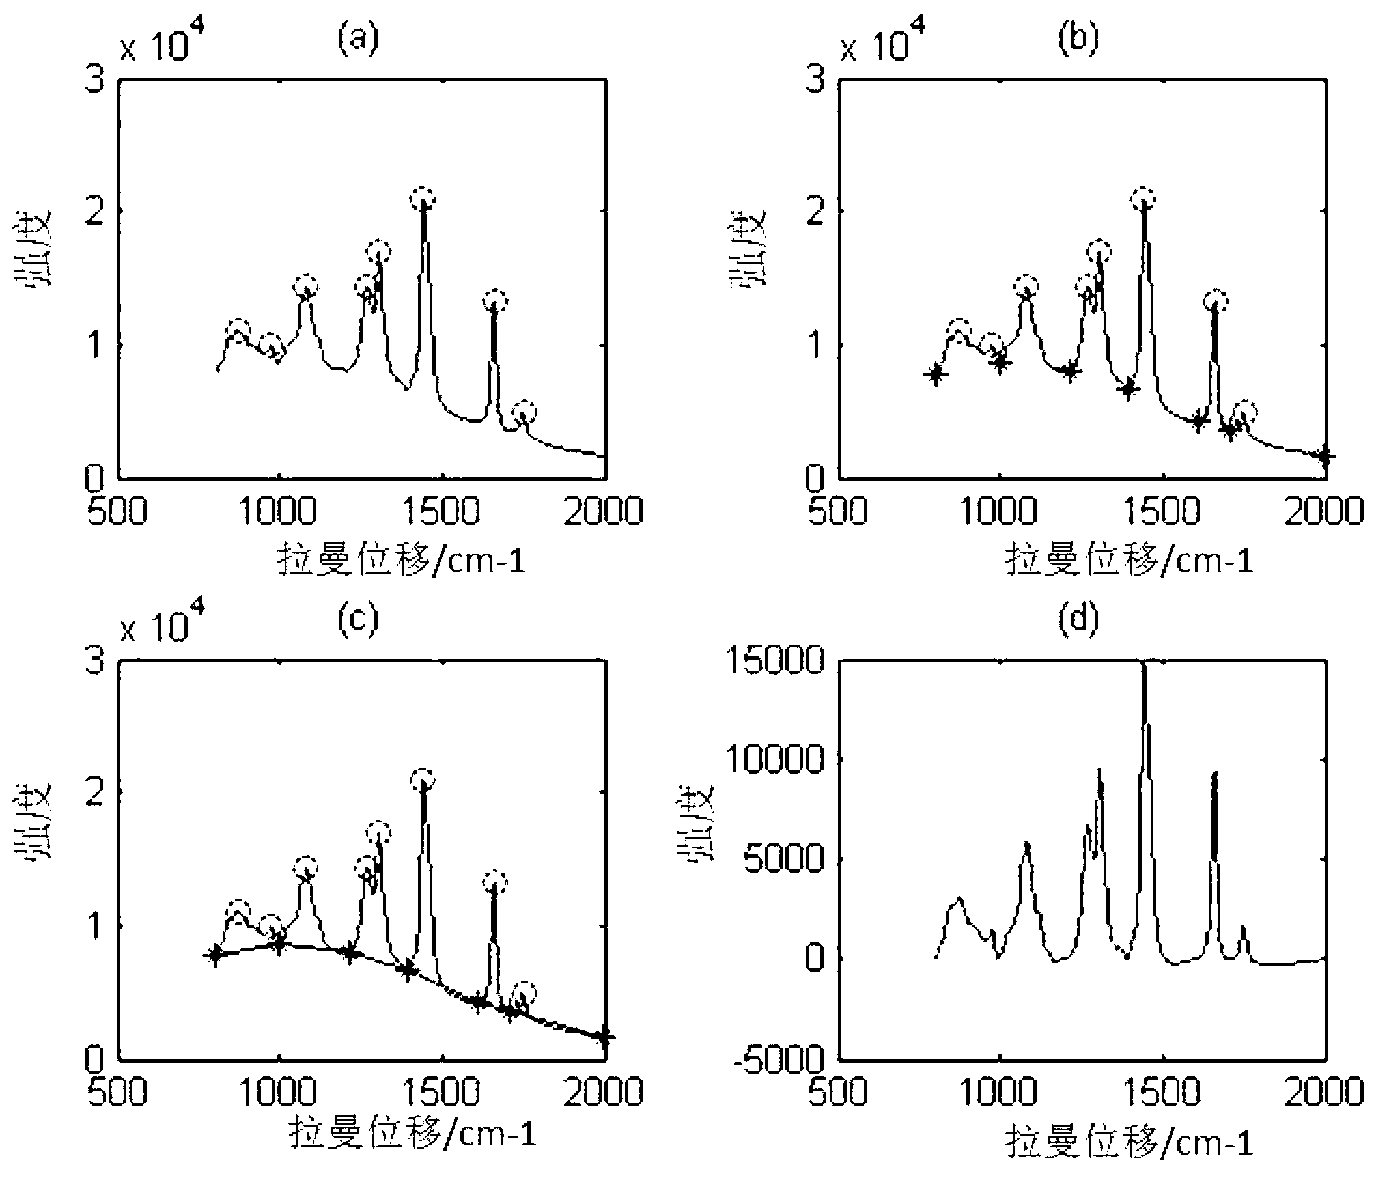 Raman-spectrum-based method for detecting content of oleic acid, linoleic acid and saturated fatty acid in edible vegetable oil